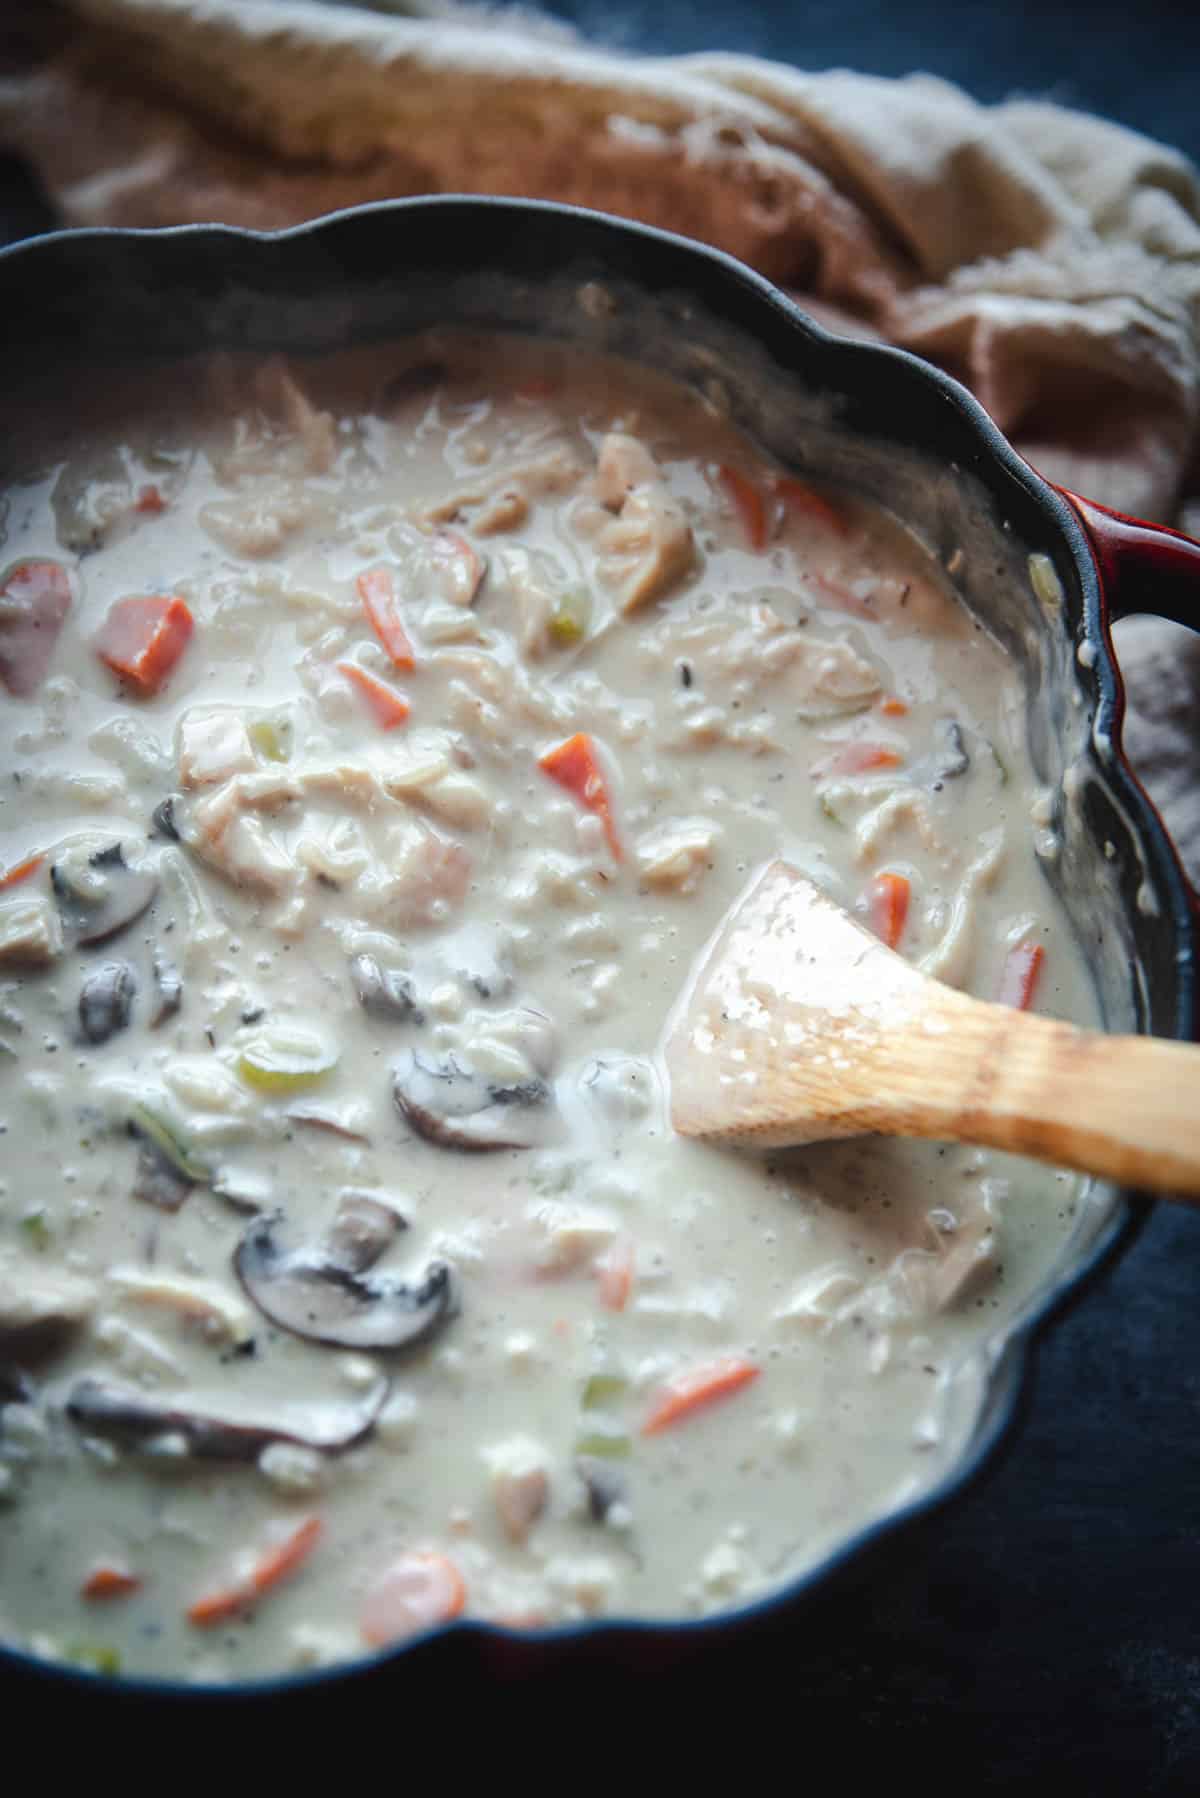 The soup has changed to a pale white  color with the addition of heavy cream The wooden spoon has incorporated all the ingredients and it looks ready to serve.